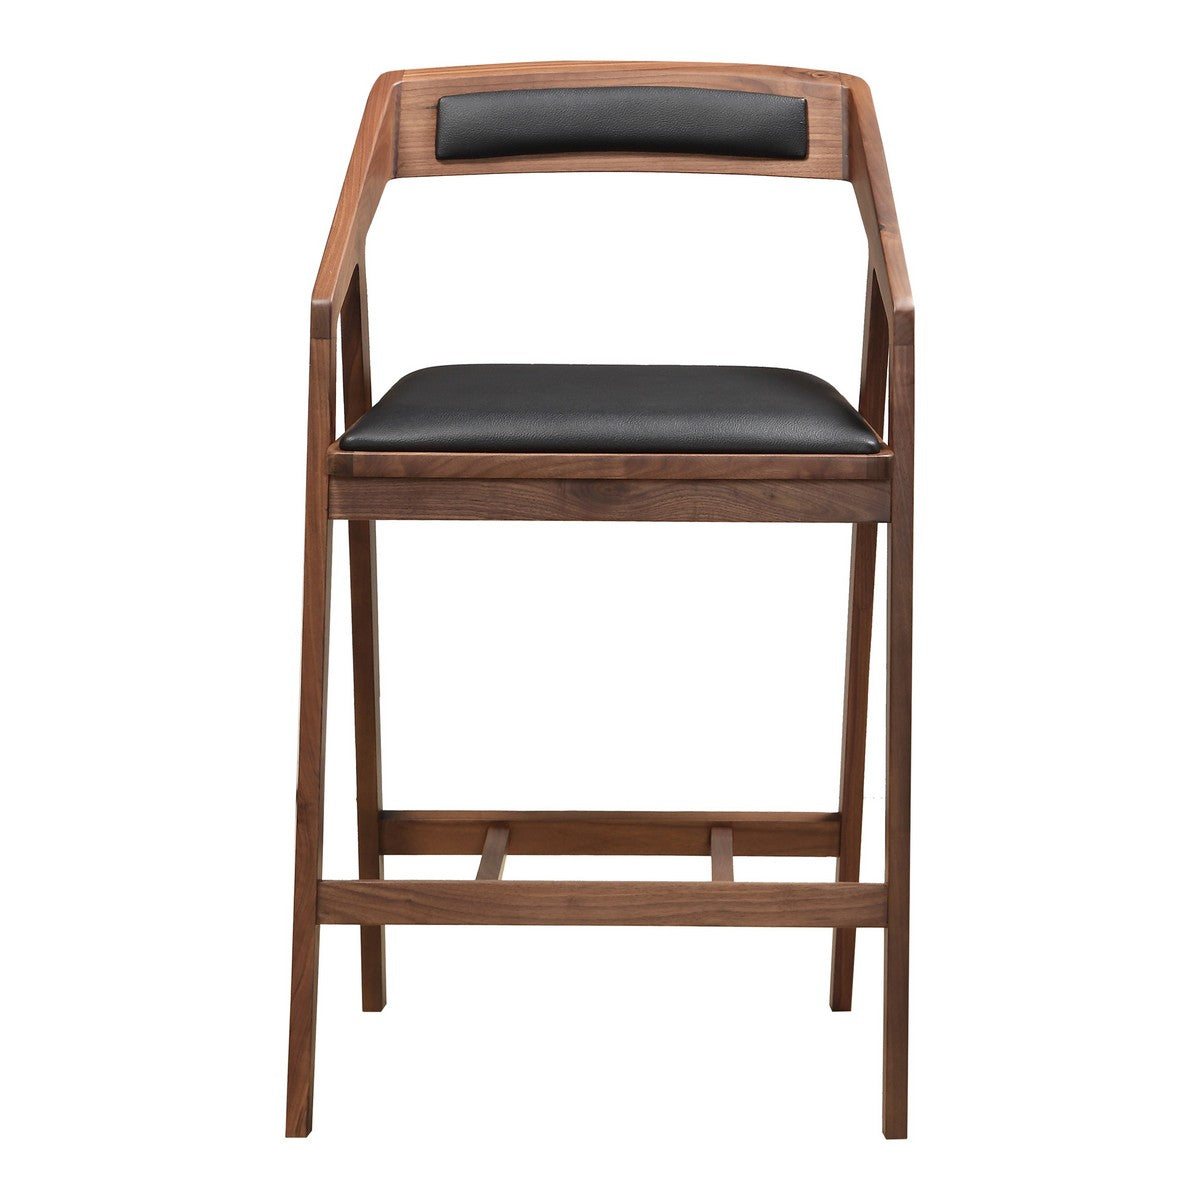 Moe's Home Collection Padma Counter Stool Black - CB-1025-03 - Moe's Home Collection - Counter Stools - Minimal And Modern - 1